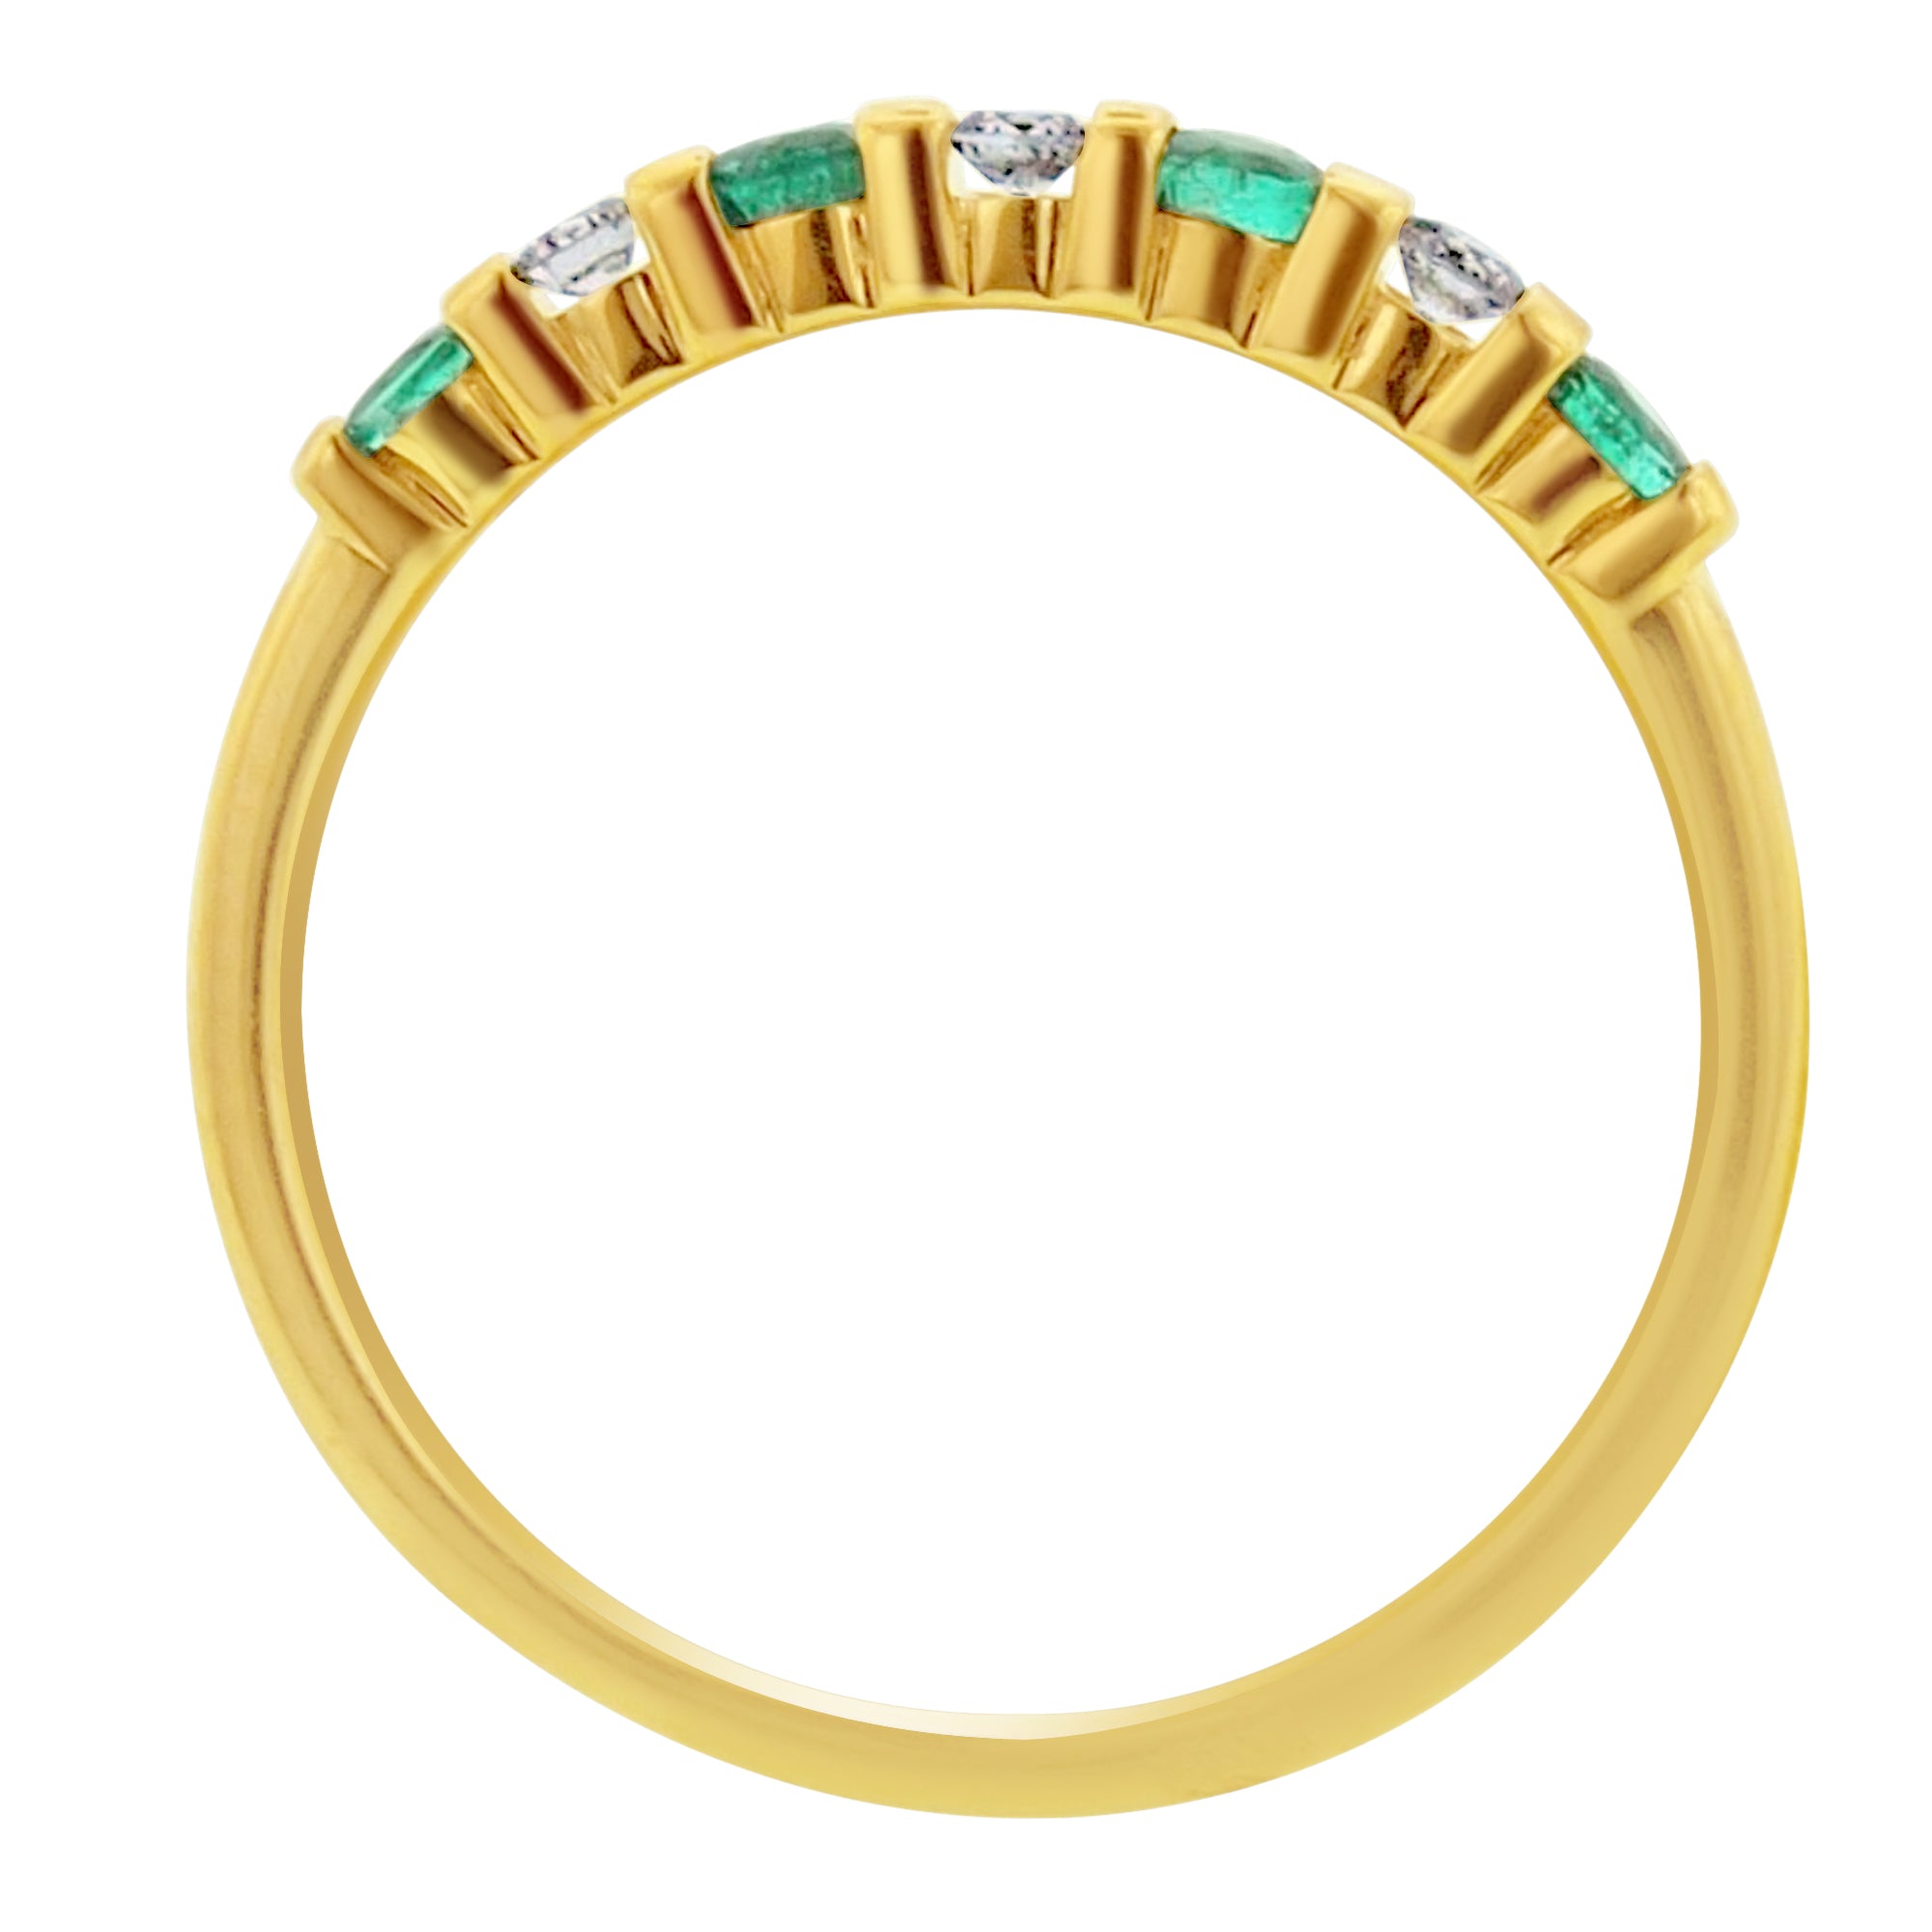 Emerald and Diamond Bar Set Anniversary Band in 14kt Yellow Gold (1/10ct tw)